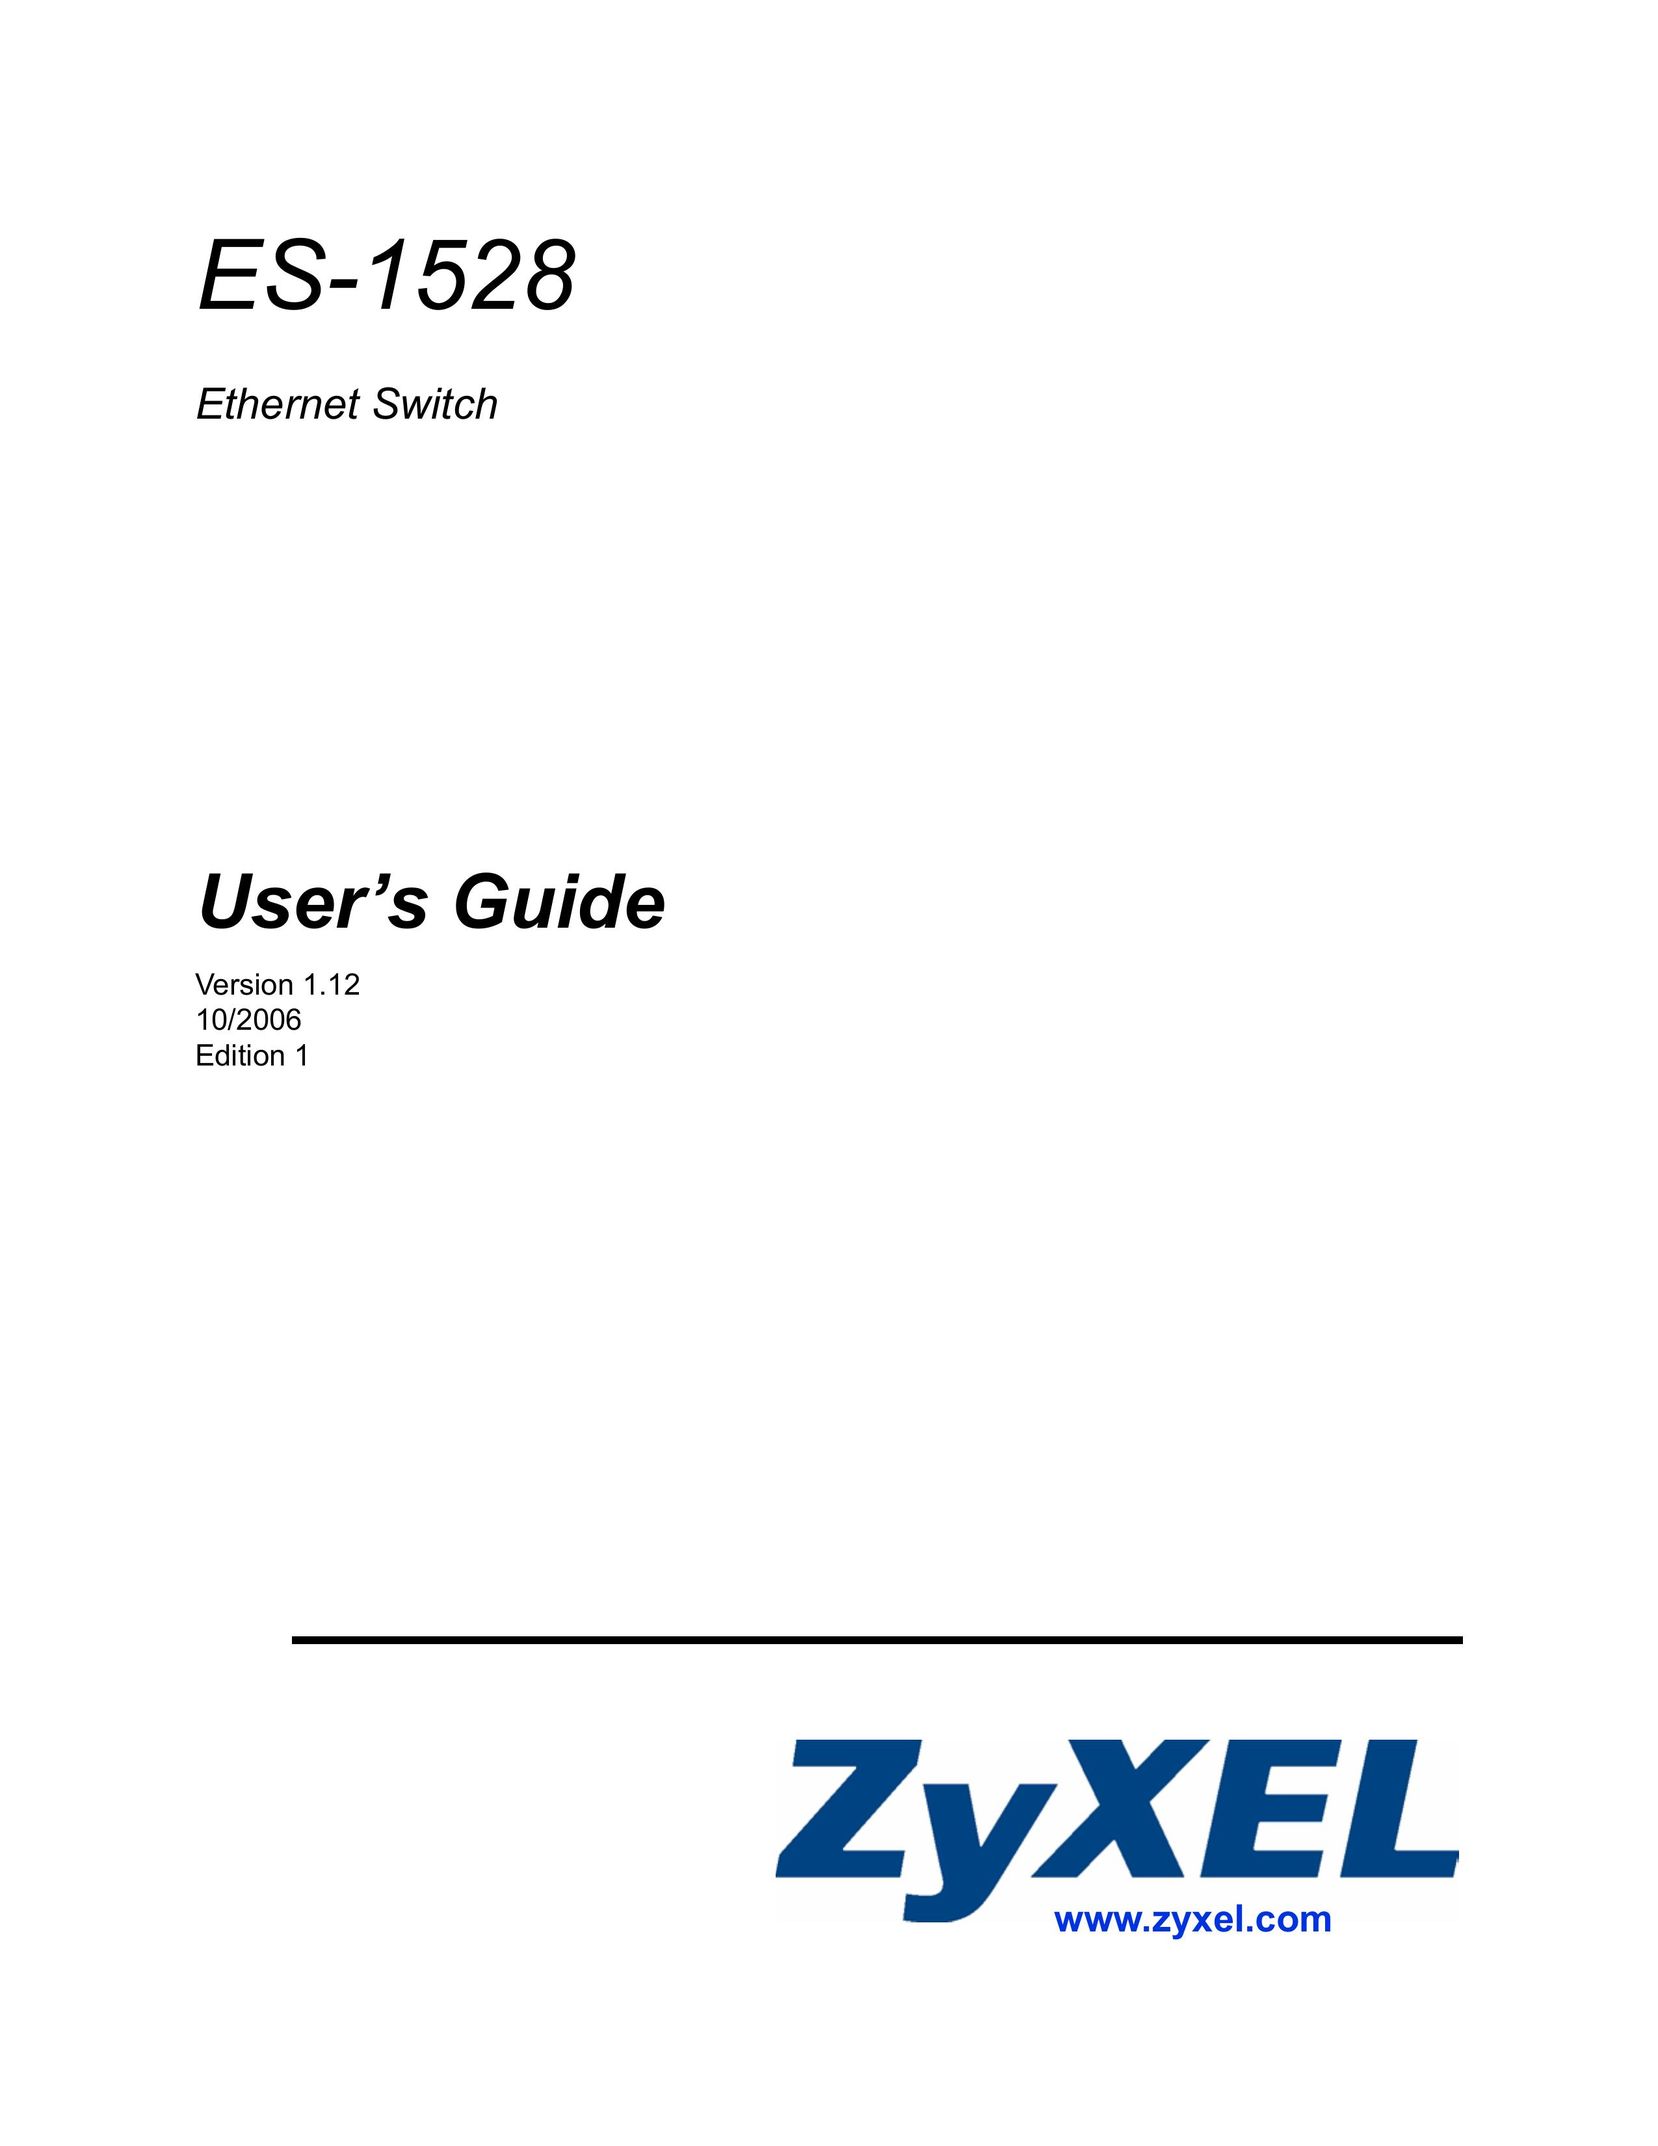 IronPort Systems ES-1528 Switch User Manual